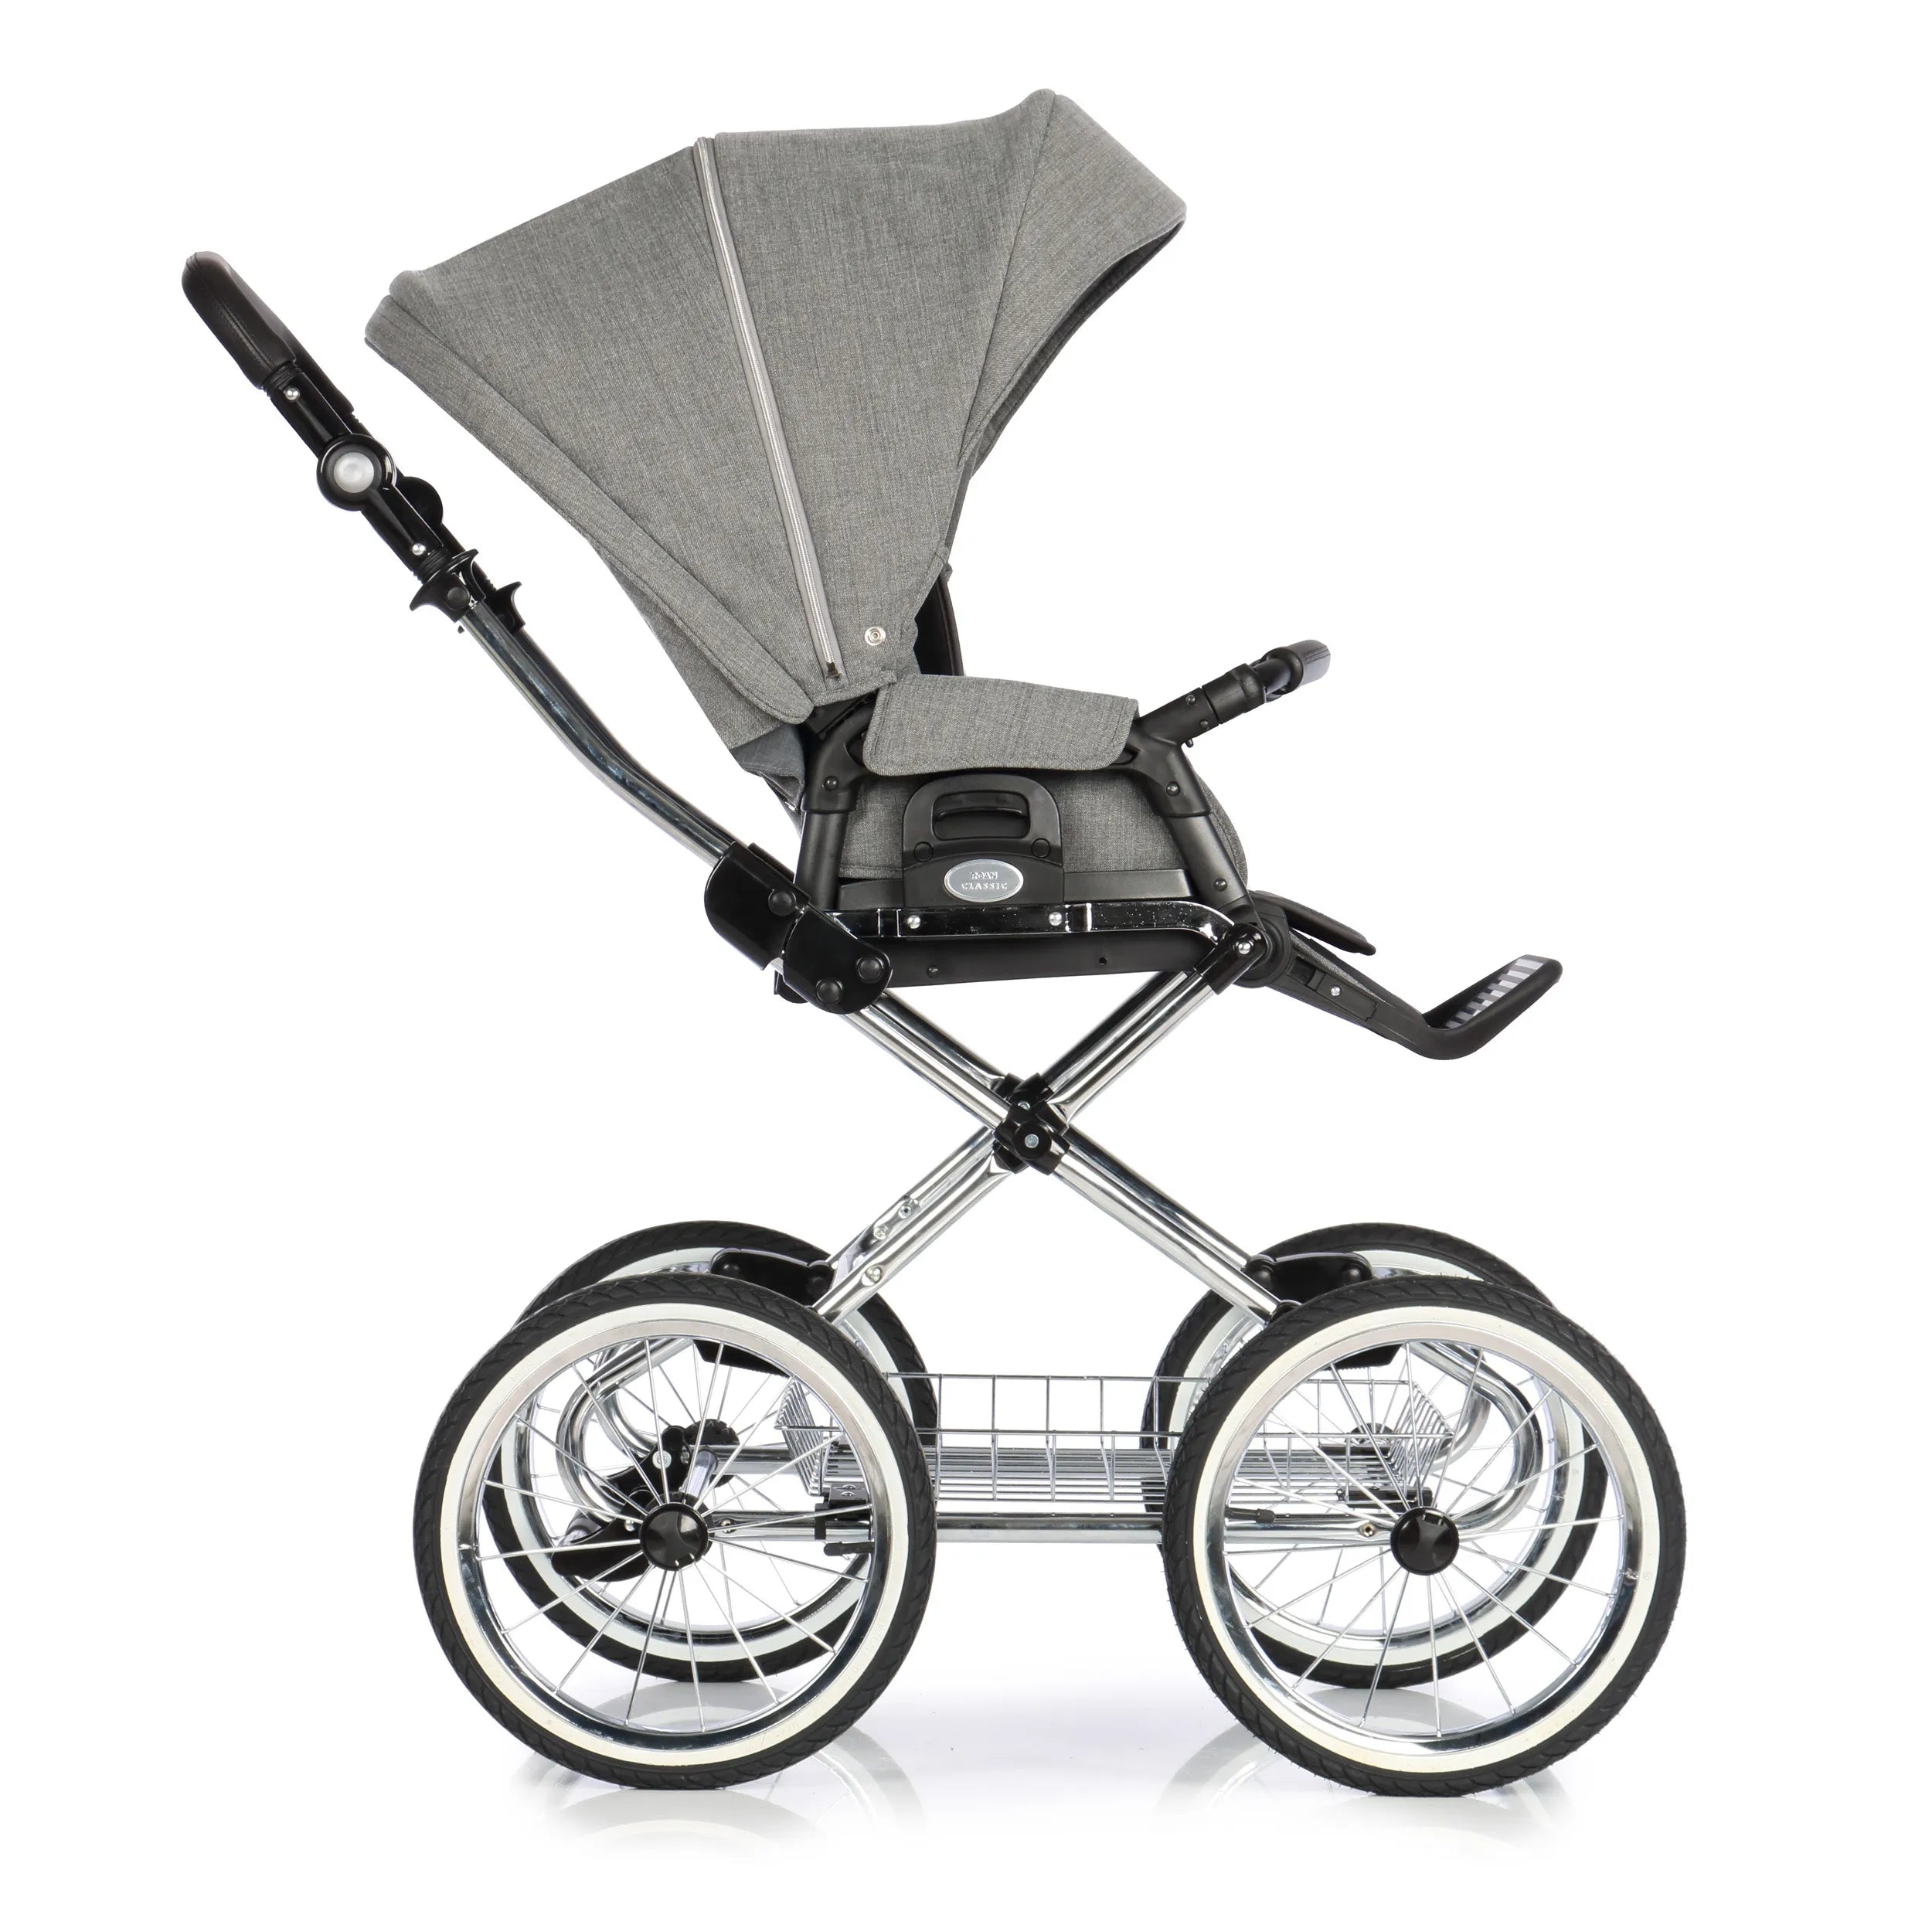 Roan COSS CLASSIC baby stroller carry cot and stroller, color Titanium